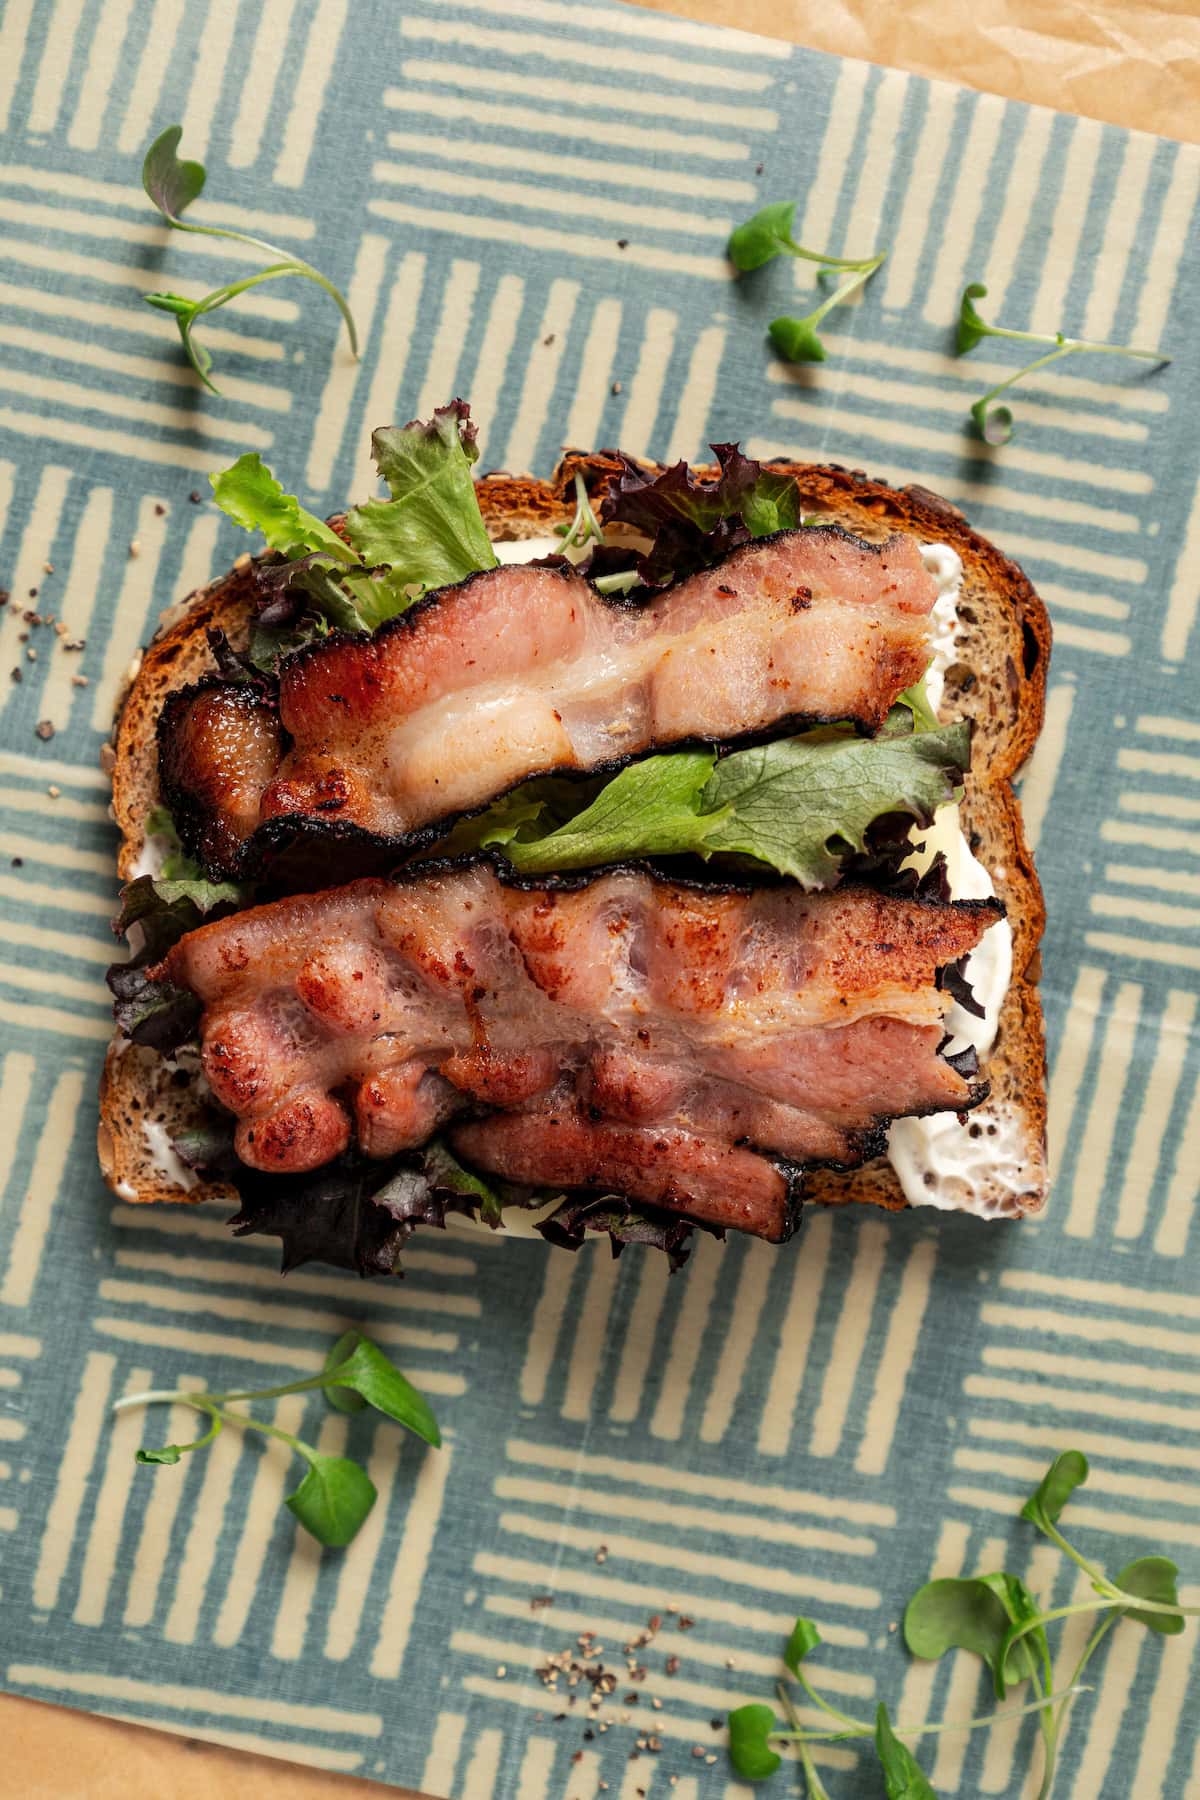 Layering lettuce and crispy bacon over a piece of bread smothered in mayo.